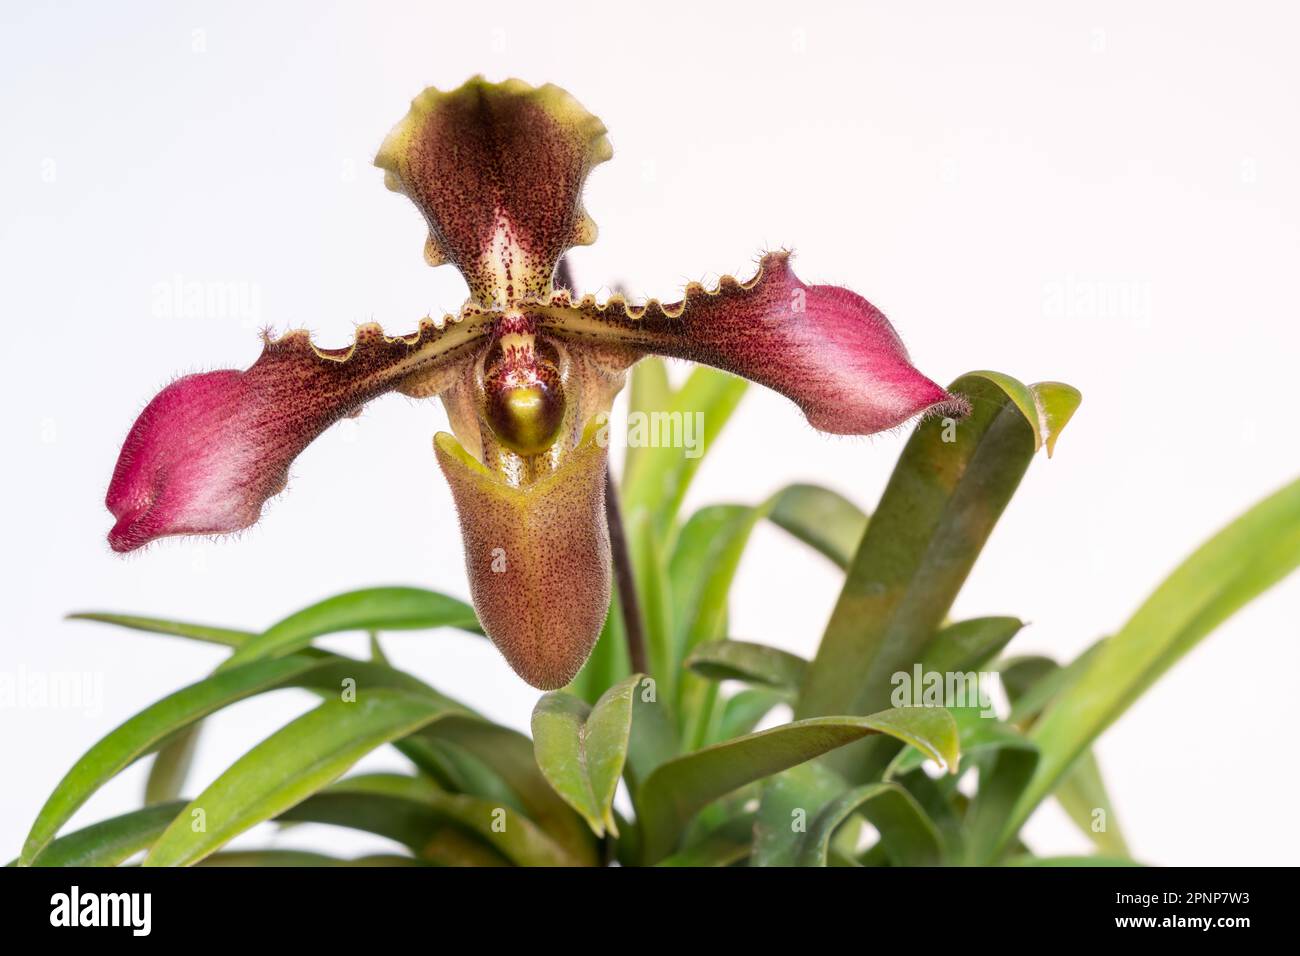 Closeup view of purple pink and yellow brown flower of lady slipper tropical orchid paphiopedilum hirsutissimum species isolated on white background Stock Photo